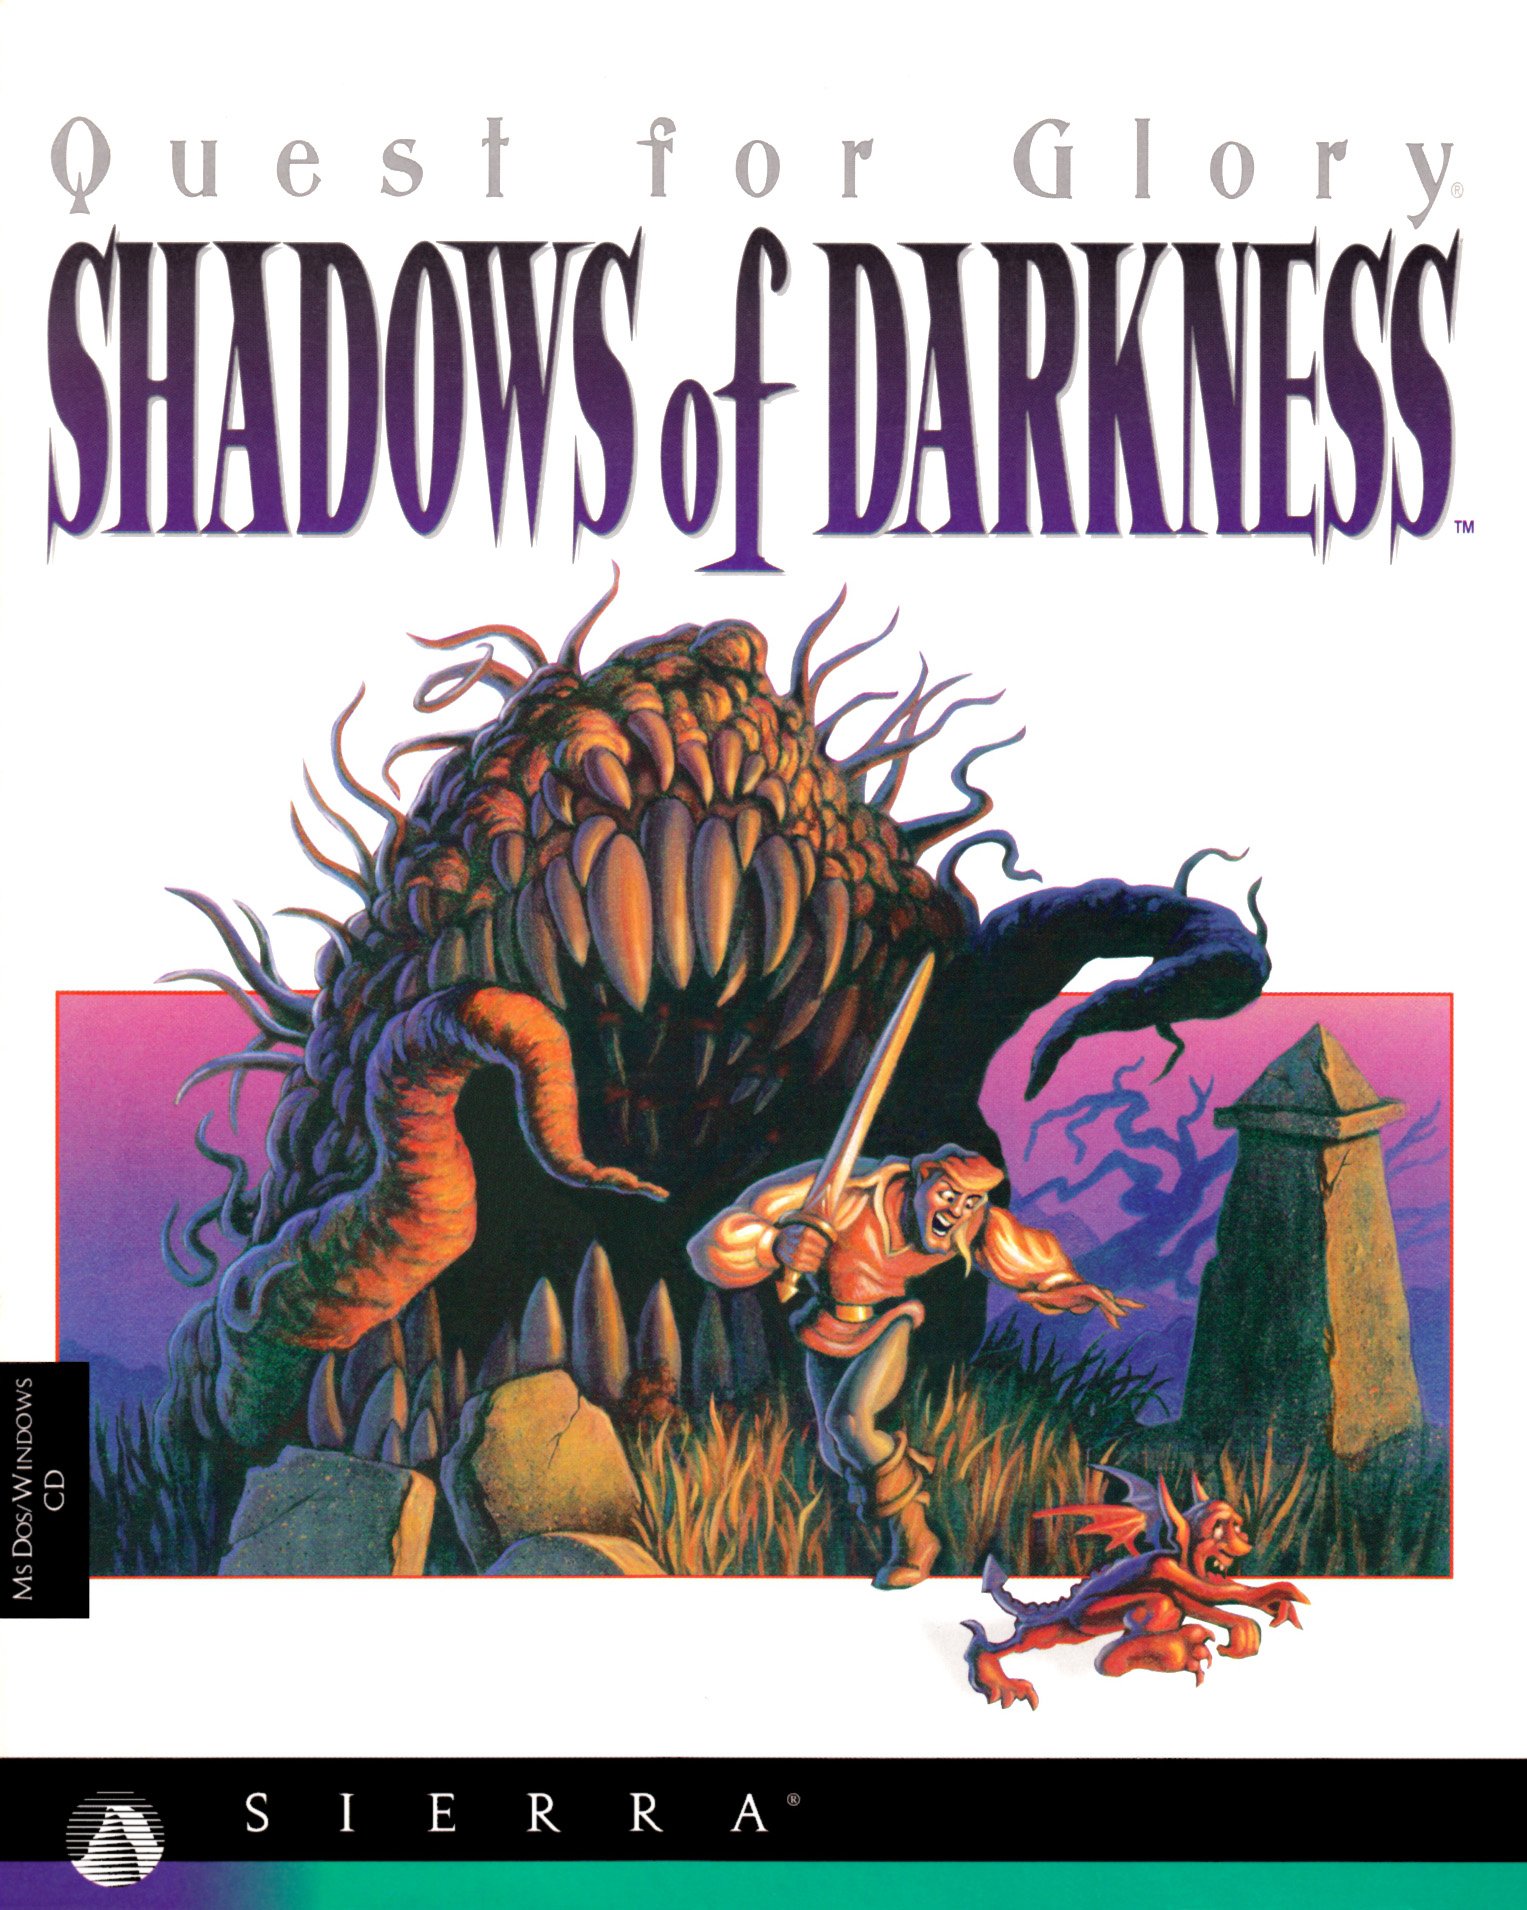 quest-for-glory-iv-shadows-of-darkness-video-game-box-art-id-186789-image-abyss